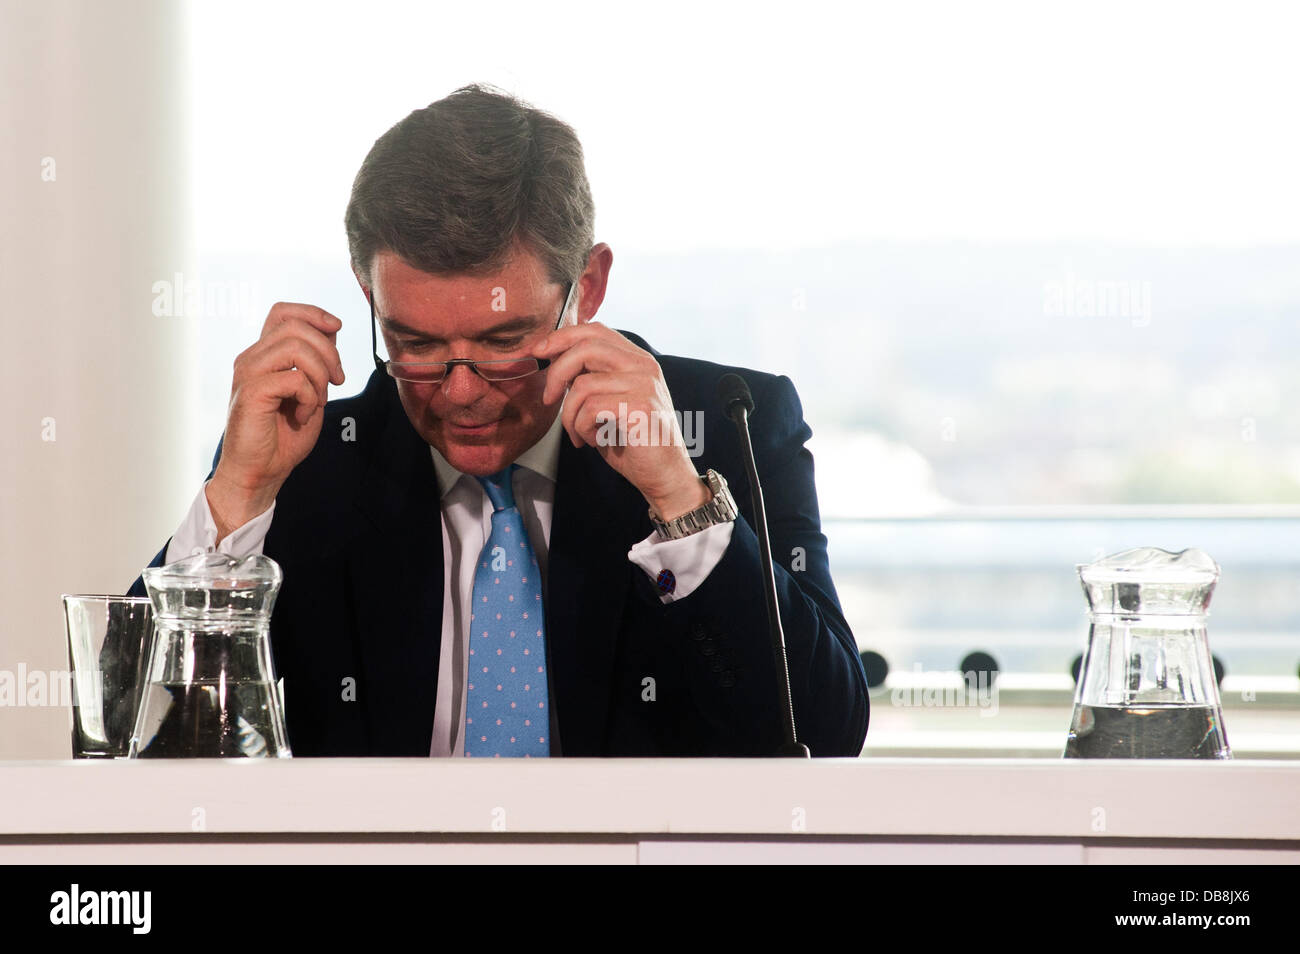 London, UK - 25 July 2013: Minister for Sport and Tourism, Rt Hon Hugh Robertson adjustes his eye glasses during the press conference Credit:  Piero Cruciatti/Alamy Live News Stock Photo